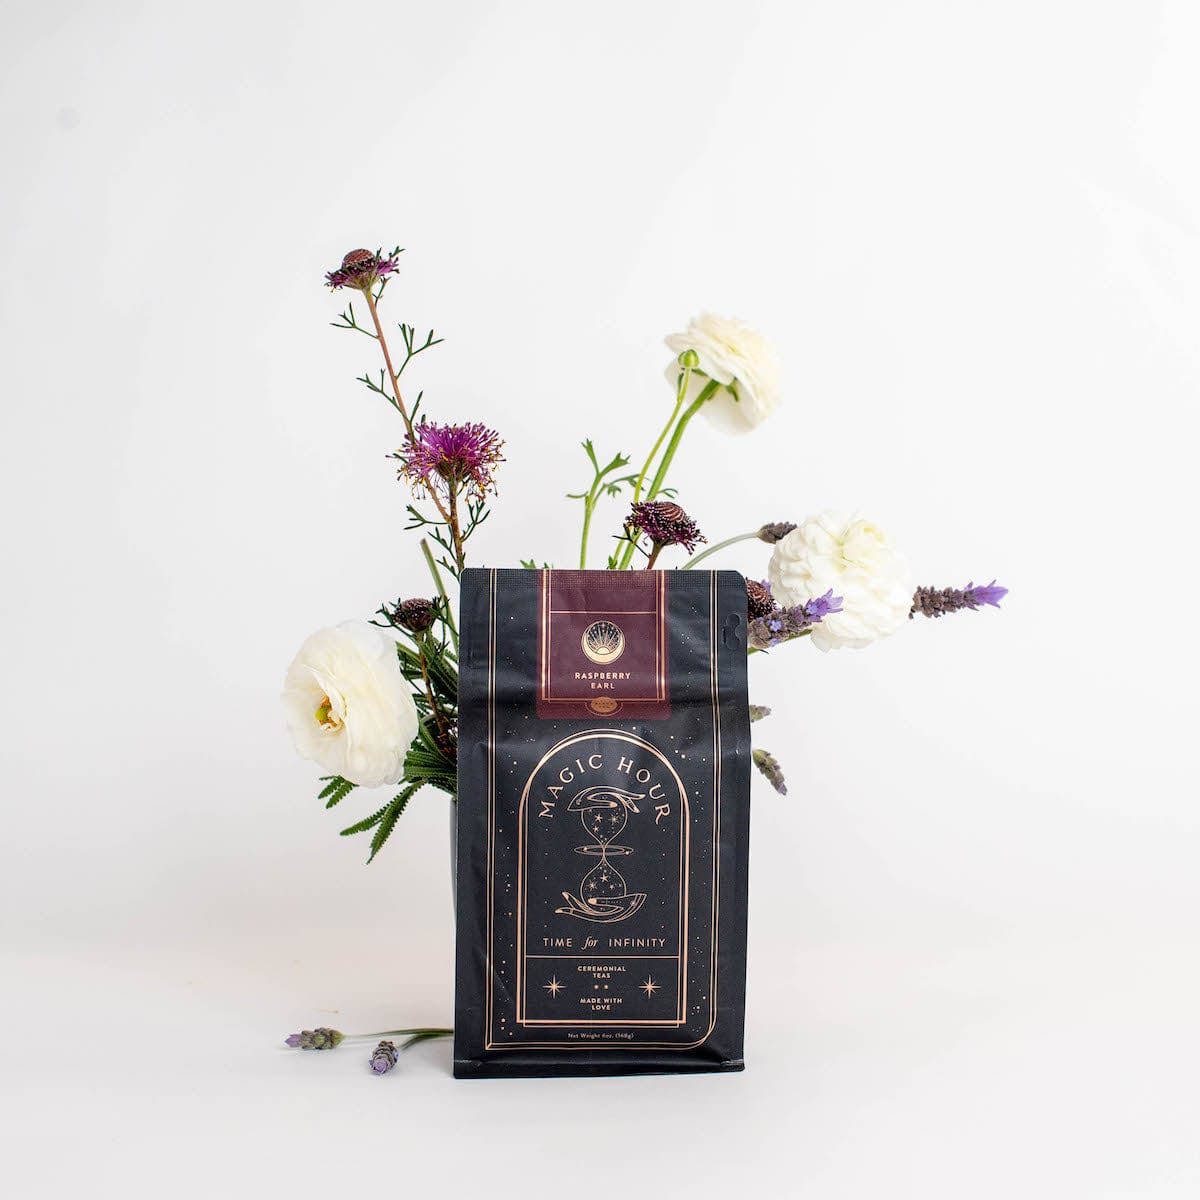 A dark-colored packet labeled "Club Magic Hour: Raspberry Earl White Tea" is placed against a white background, partially surrounded by a small arrangement of white and purple flowers. The packet, filled with organic loose leaf tea, displays an intricate design featuring celestial imagery.